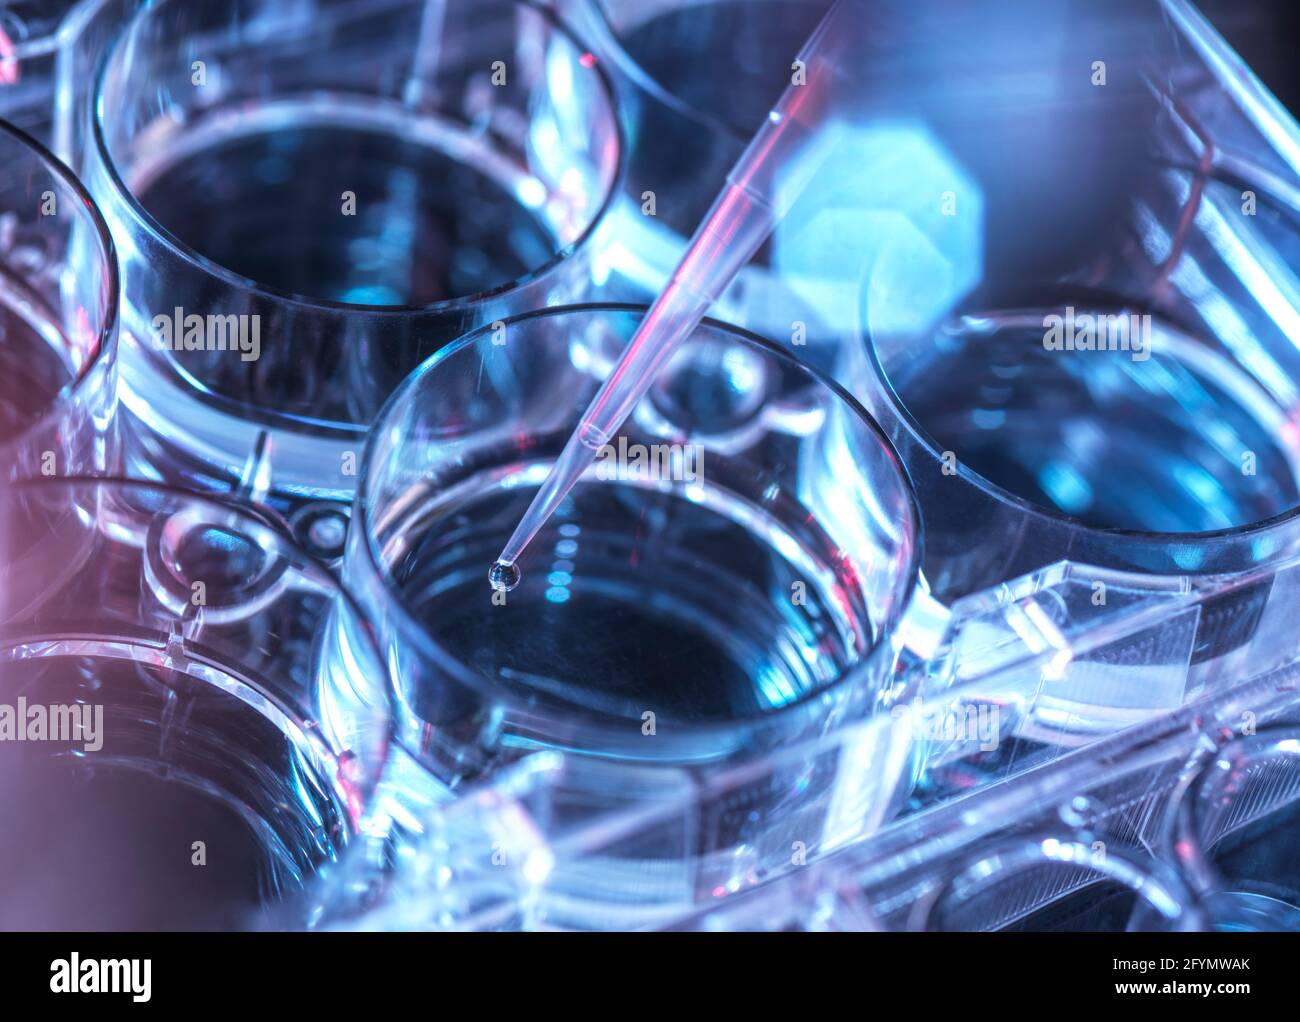 Biotechnology research Stock Photo